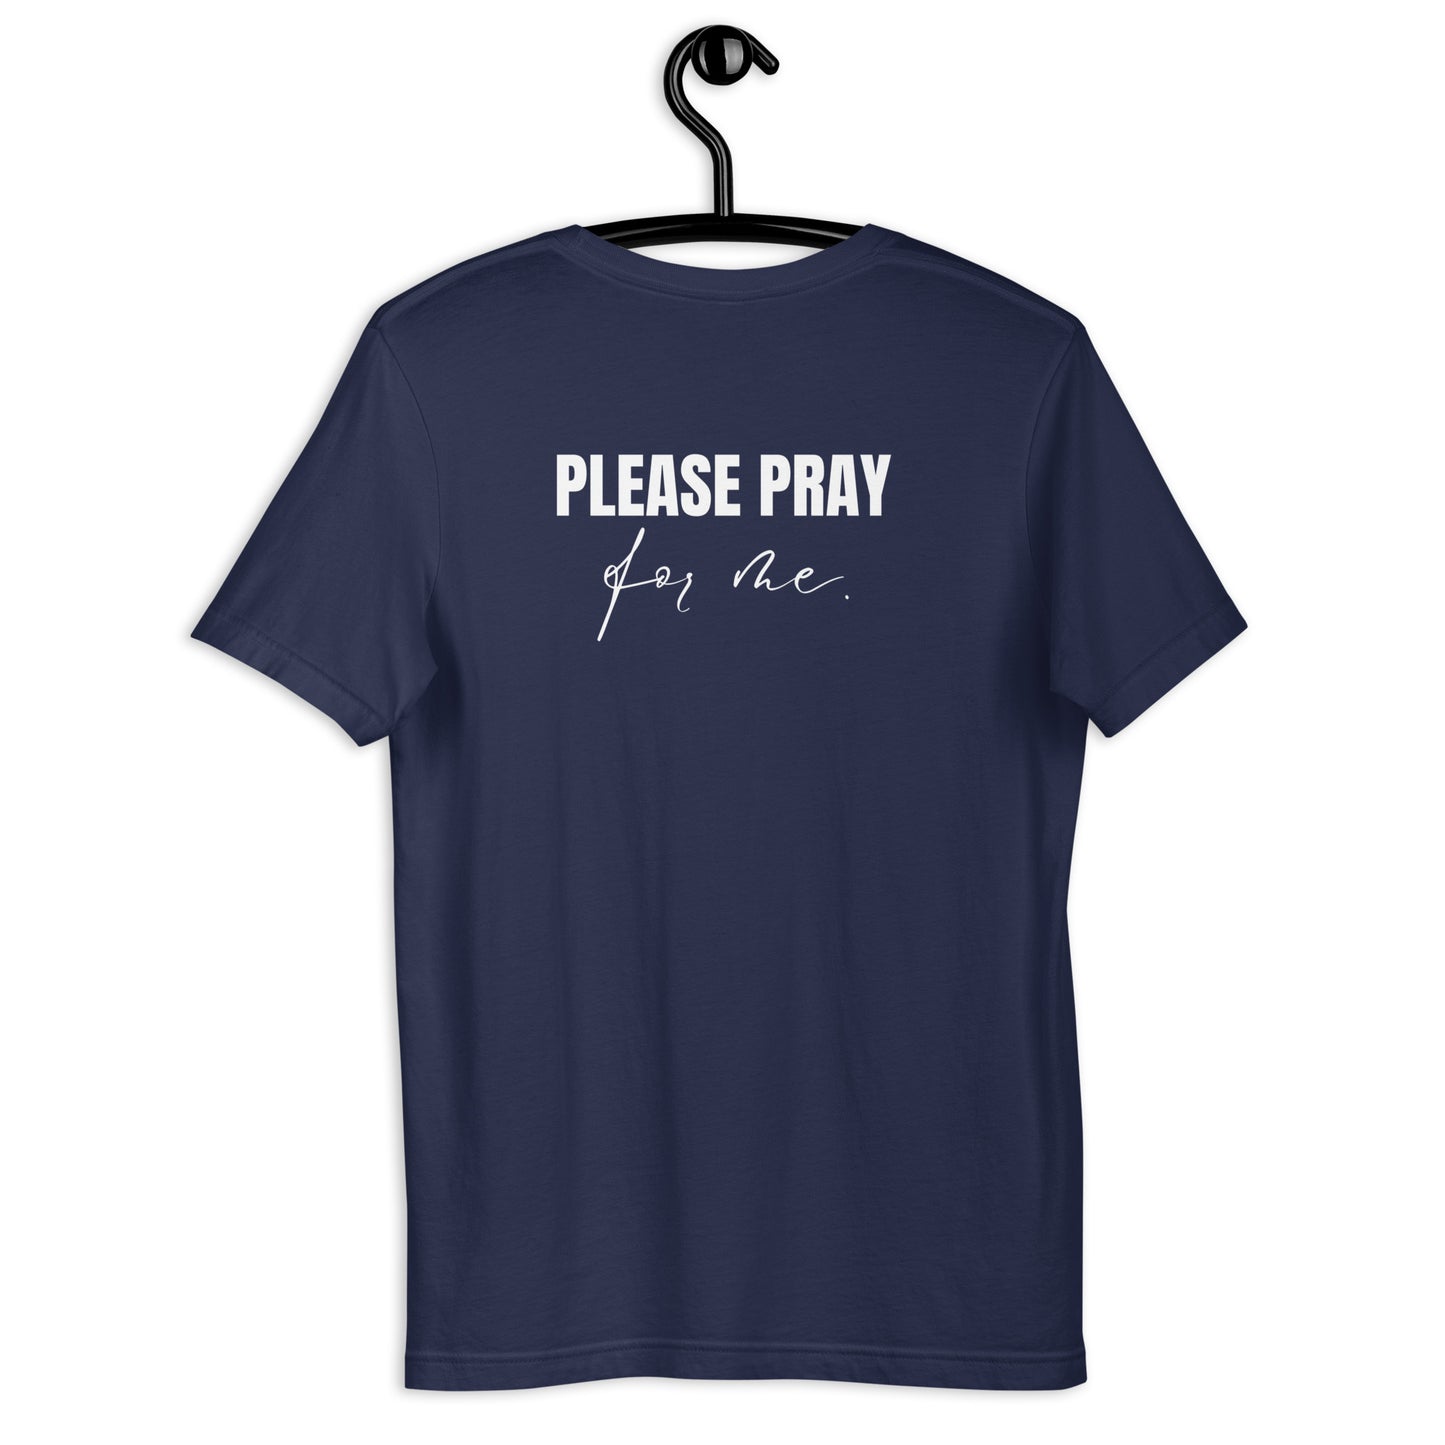 Praying for you - in color - Unisex t-shirt